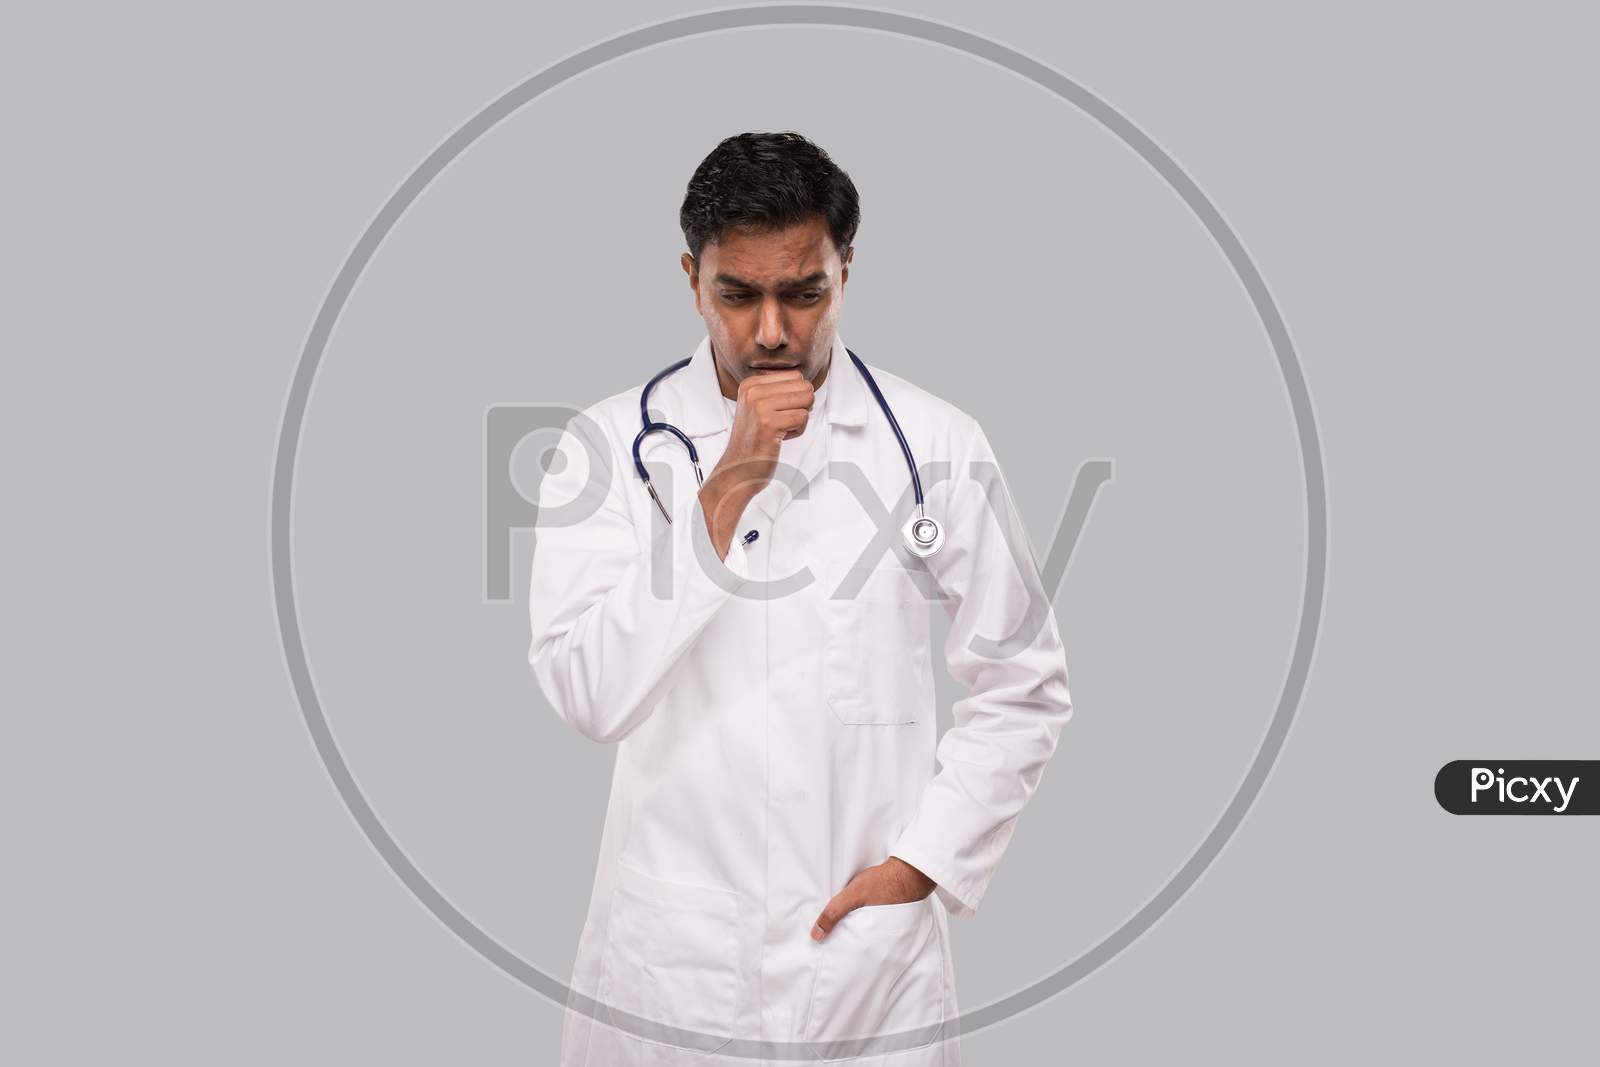 Doctor Coughing Isolated. Indian Man Doctor Coughing Wearing White Coat. Medical Concept